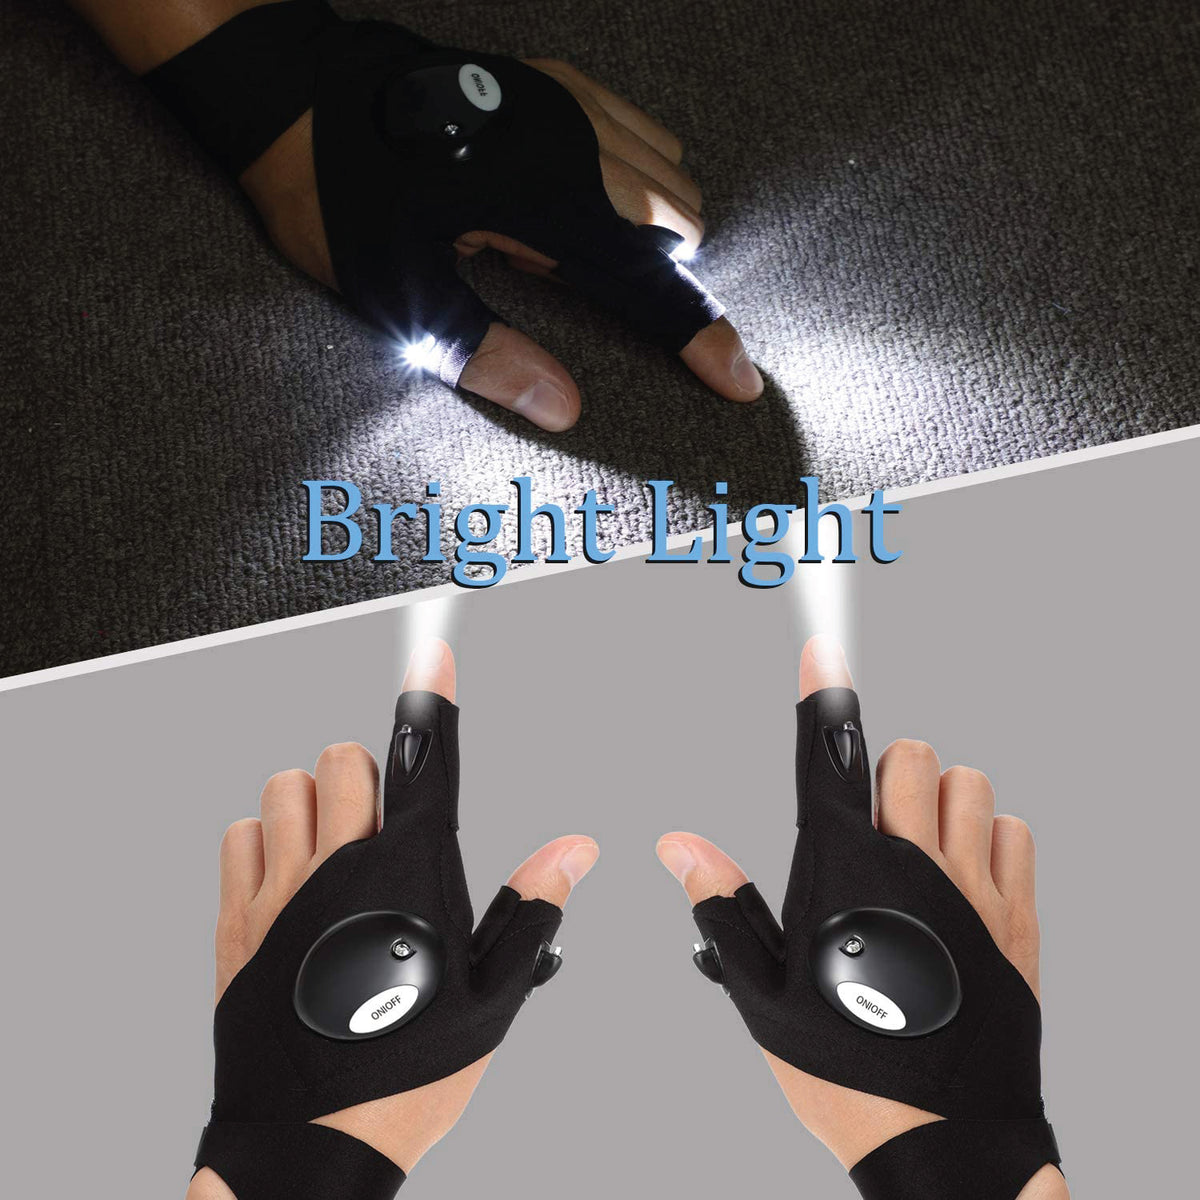 Gloves With Lights on Fingers 